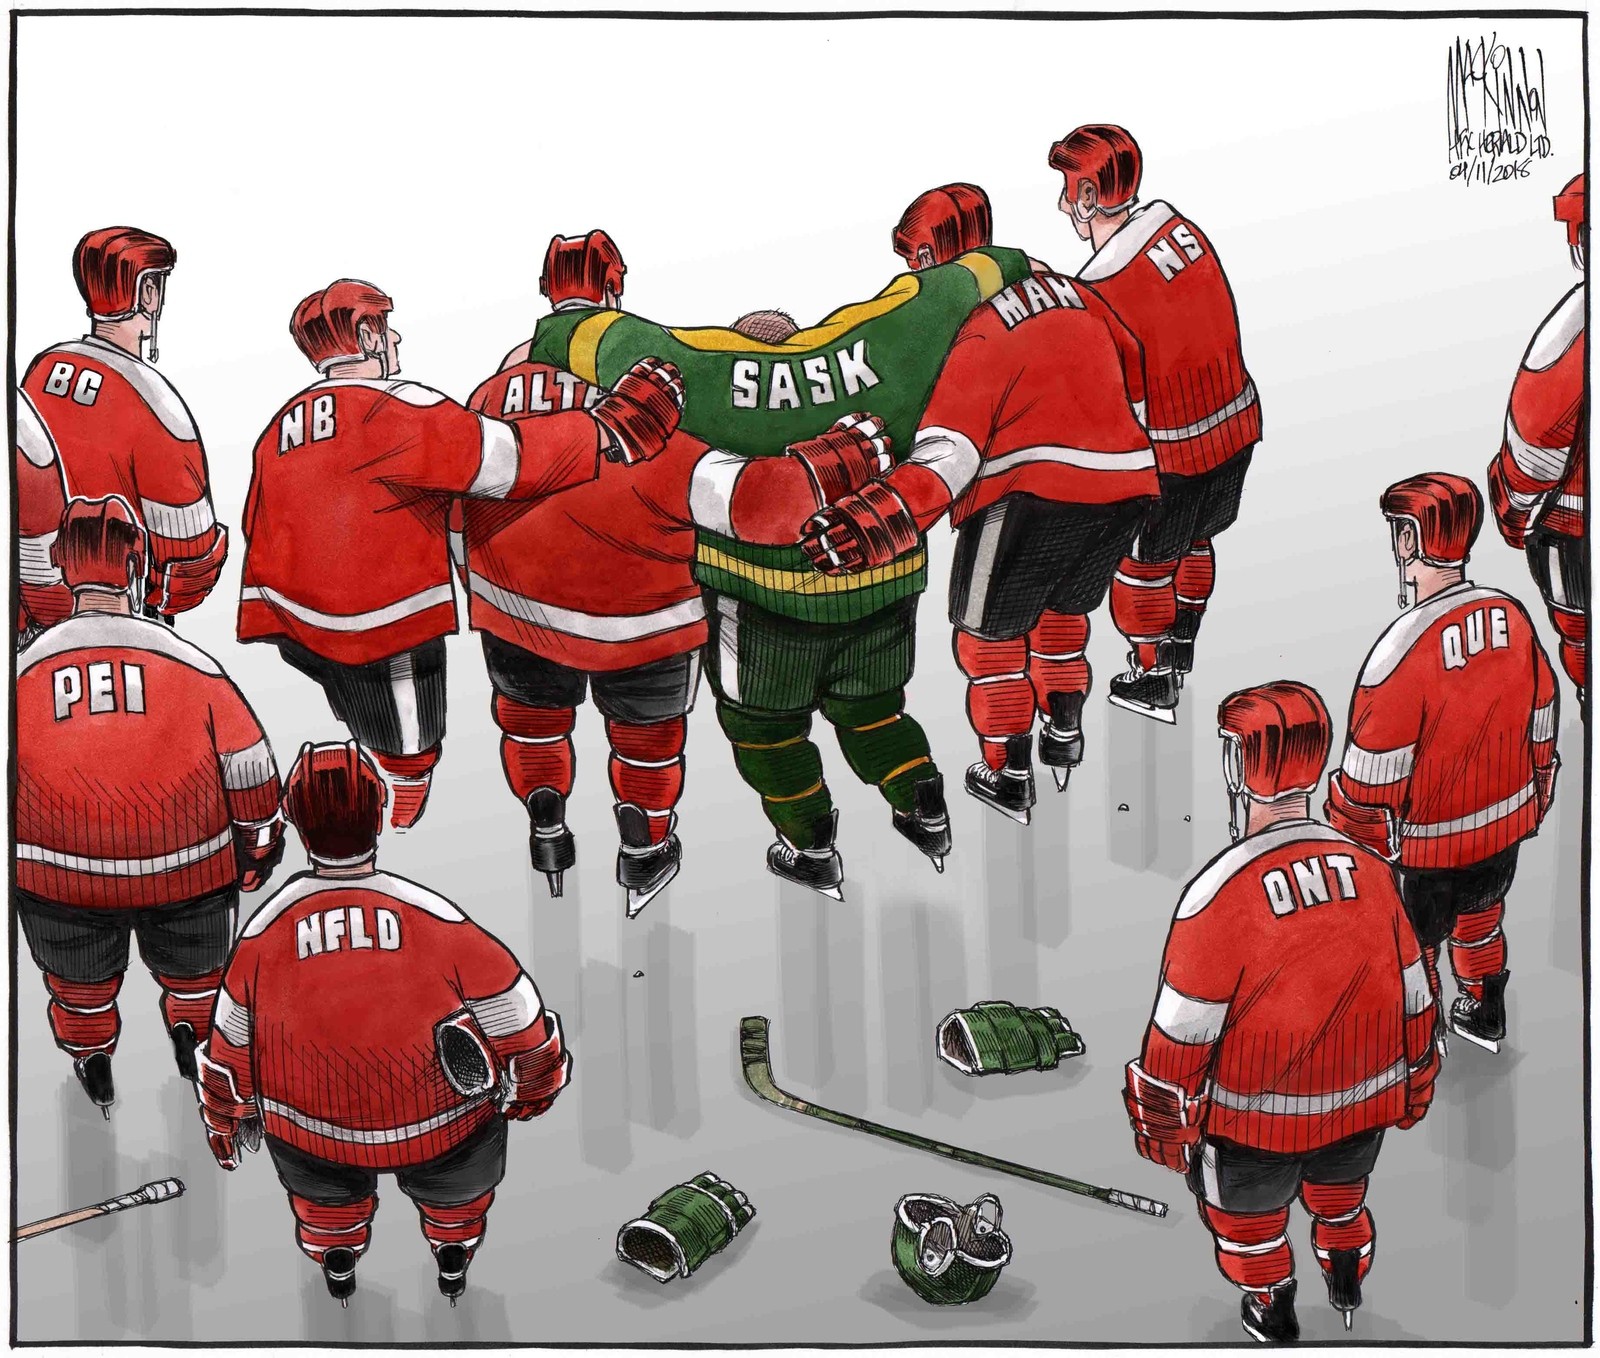 A newspaper illustration by Bruce MacKinnon that shows hockey players in red supporting a Humboldt Broncos player, in honour of the April 2018 bus crash that killed 16 players